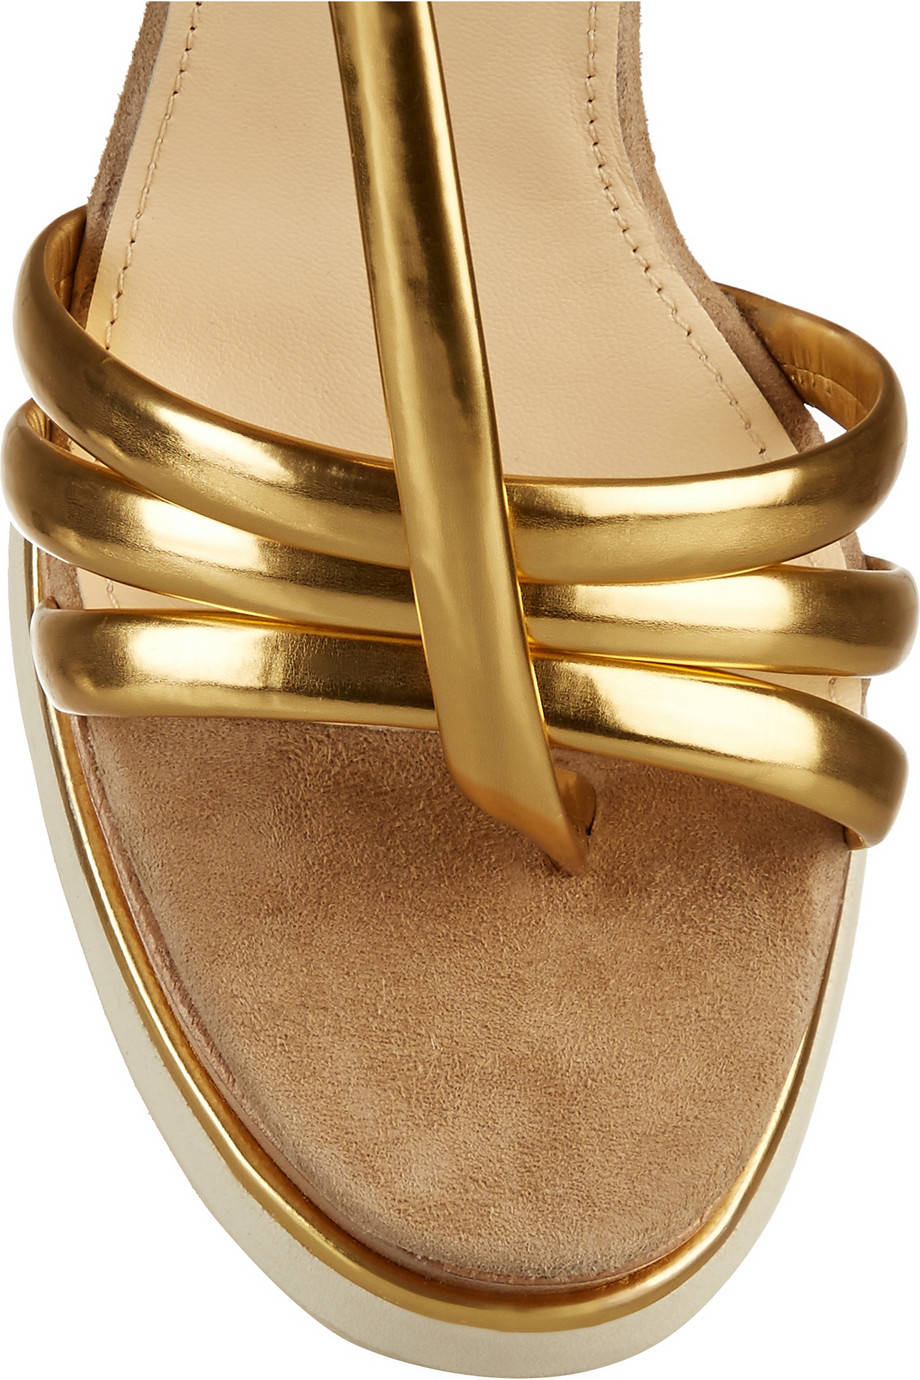 Paloma barceló Metallic Leather And Suede Wedge Sandals in Beige ...